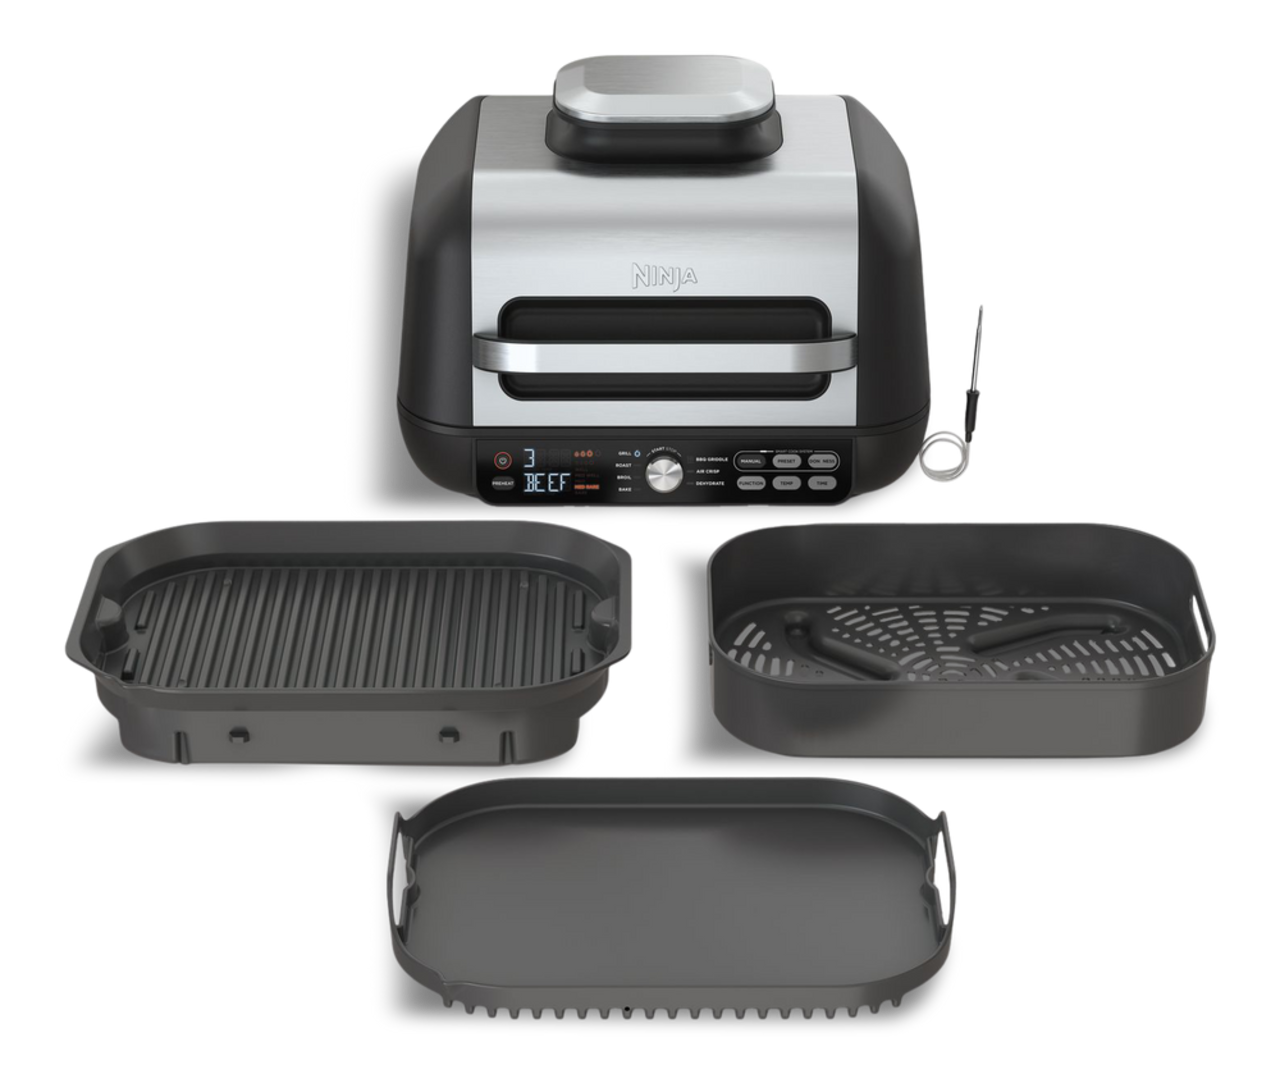 Restored Ninja IG601 Foodi XL 7in1 Indoor Grill Combo, Use Opened or Closed, Air Fry, Dehydrate & More, Pro Power Grate, Flat Top Griddle, Crisper